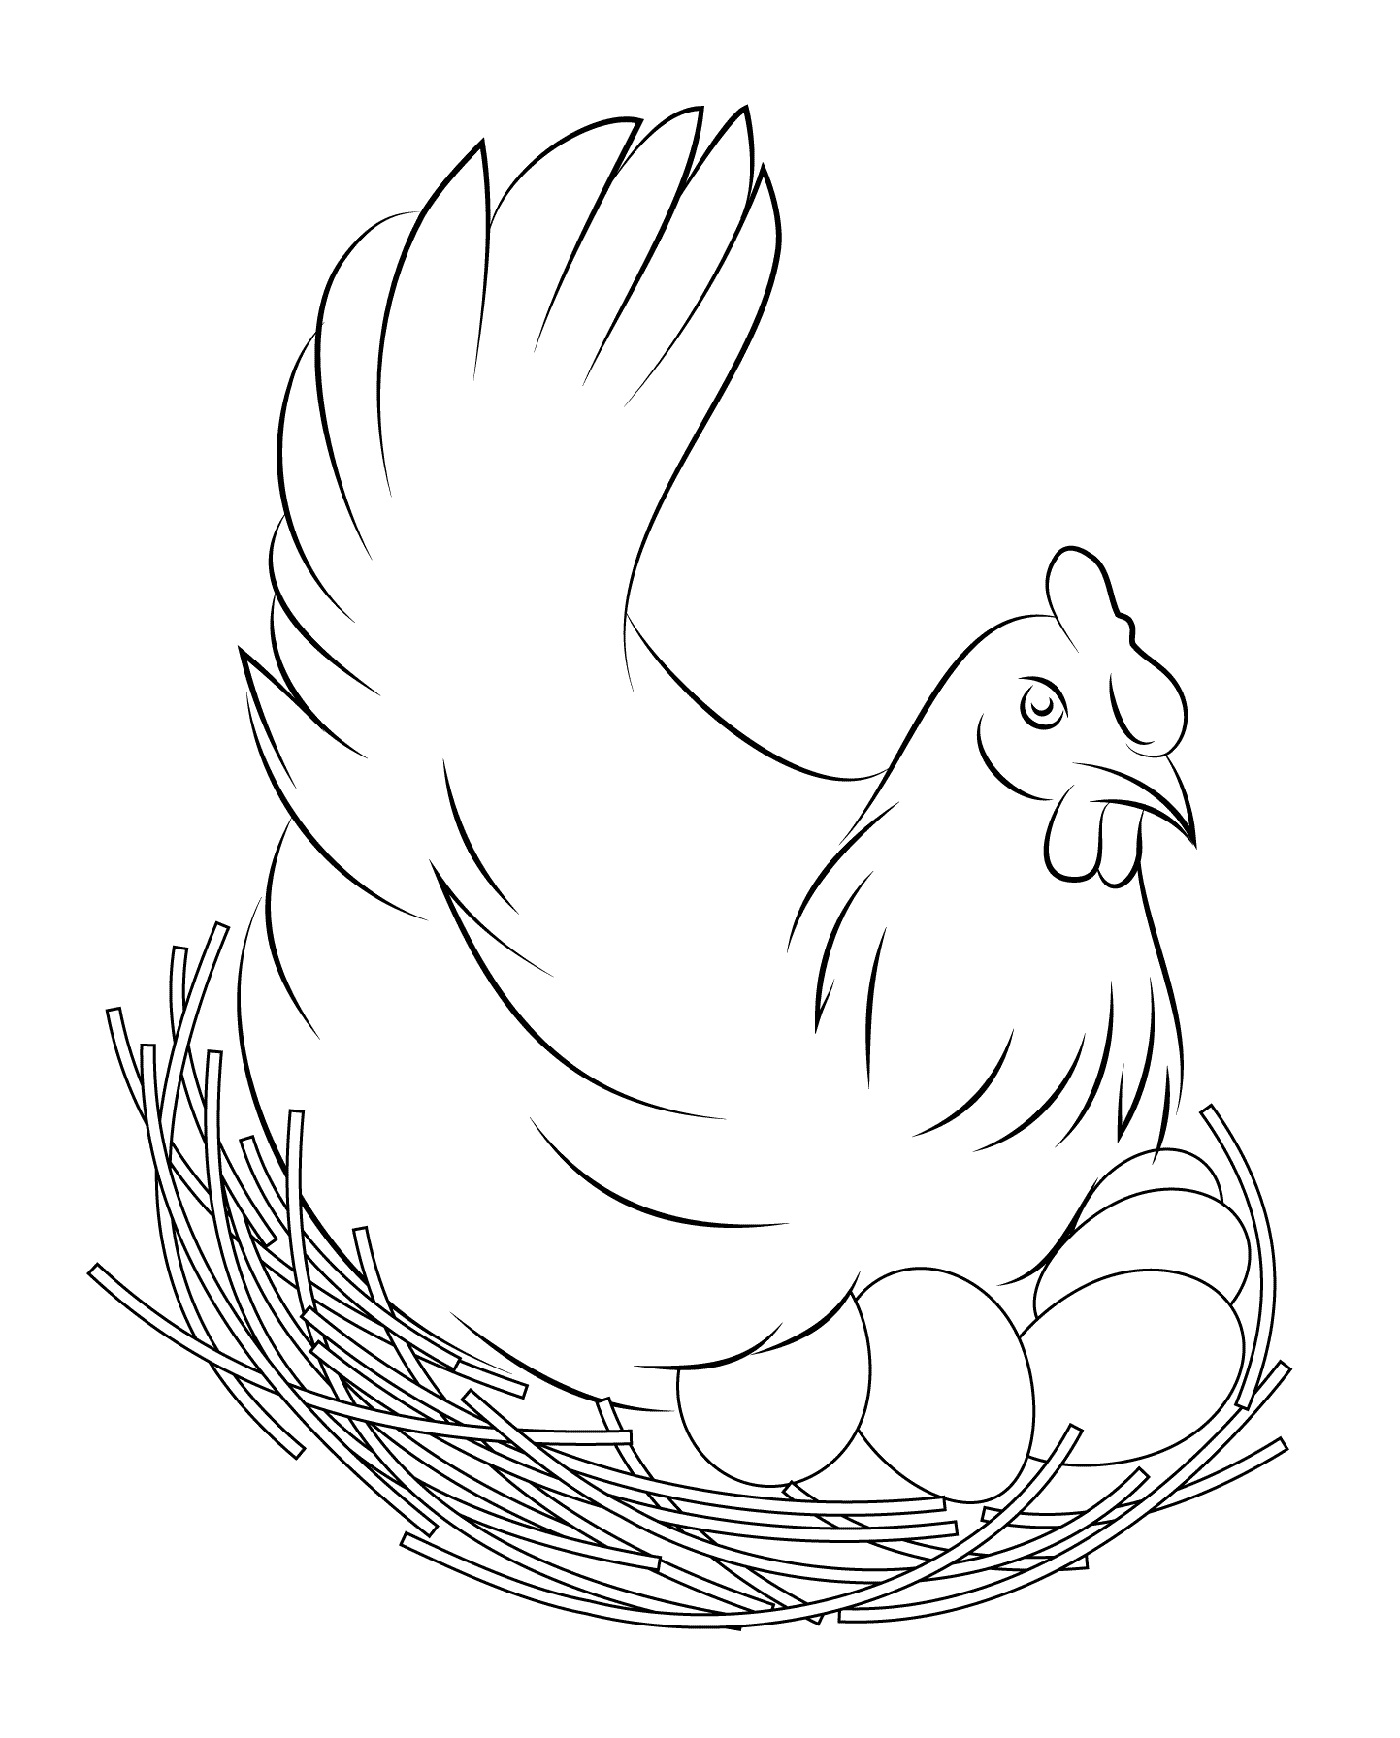 Printable Chicken Coloring Pages - chicken coloring pages printable